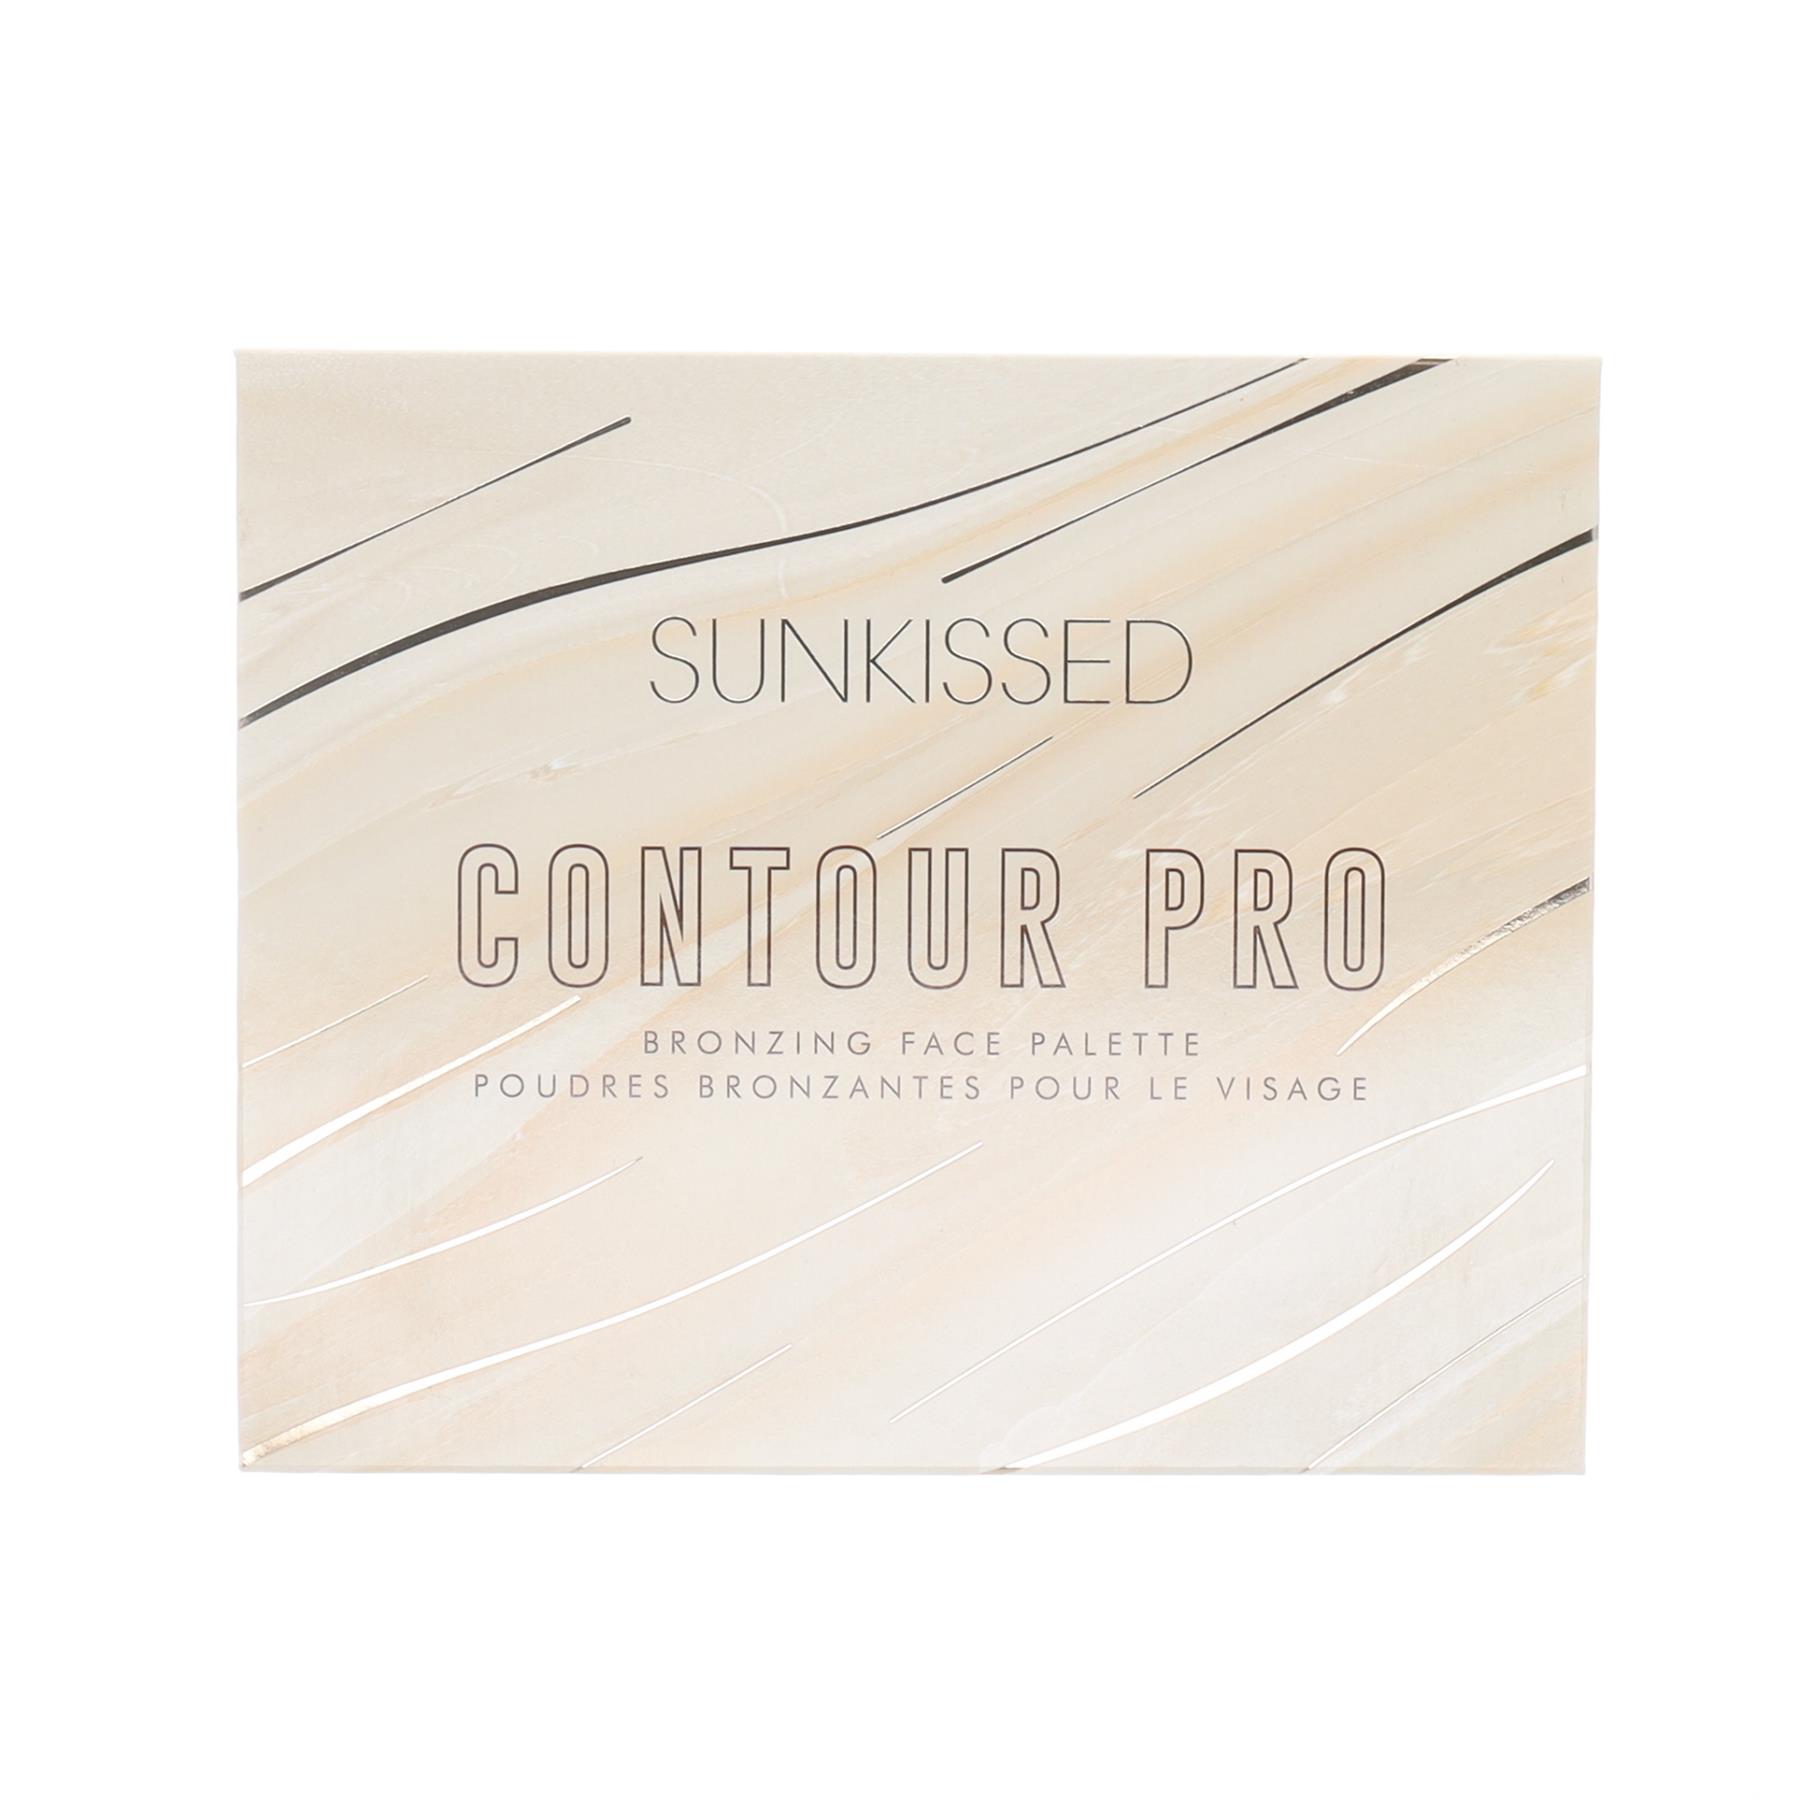 Sunkissed Contour Pro Bronzing Face Palette - Face Powder, Bronzer, Blusher from Perfume Plus Direct